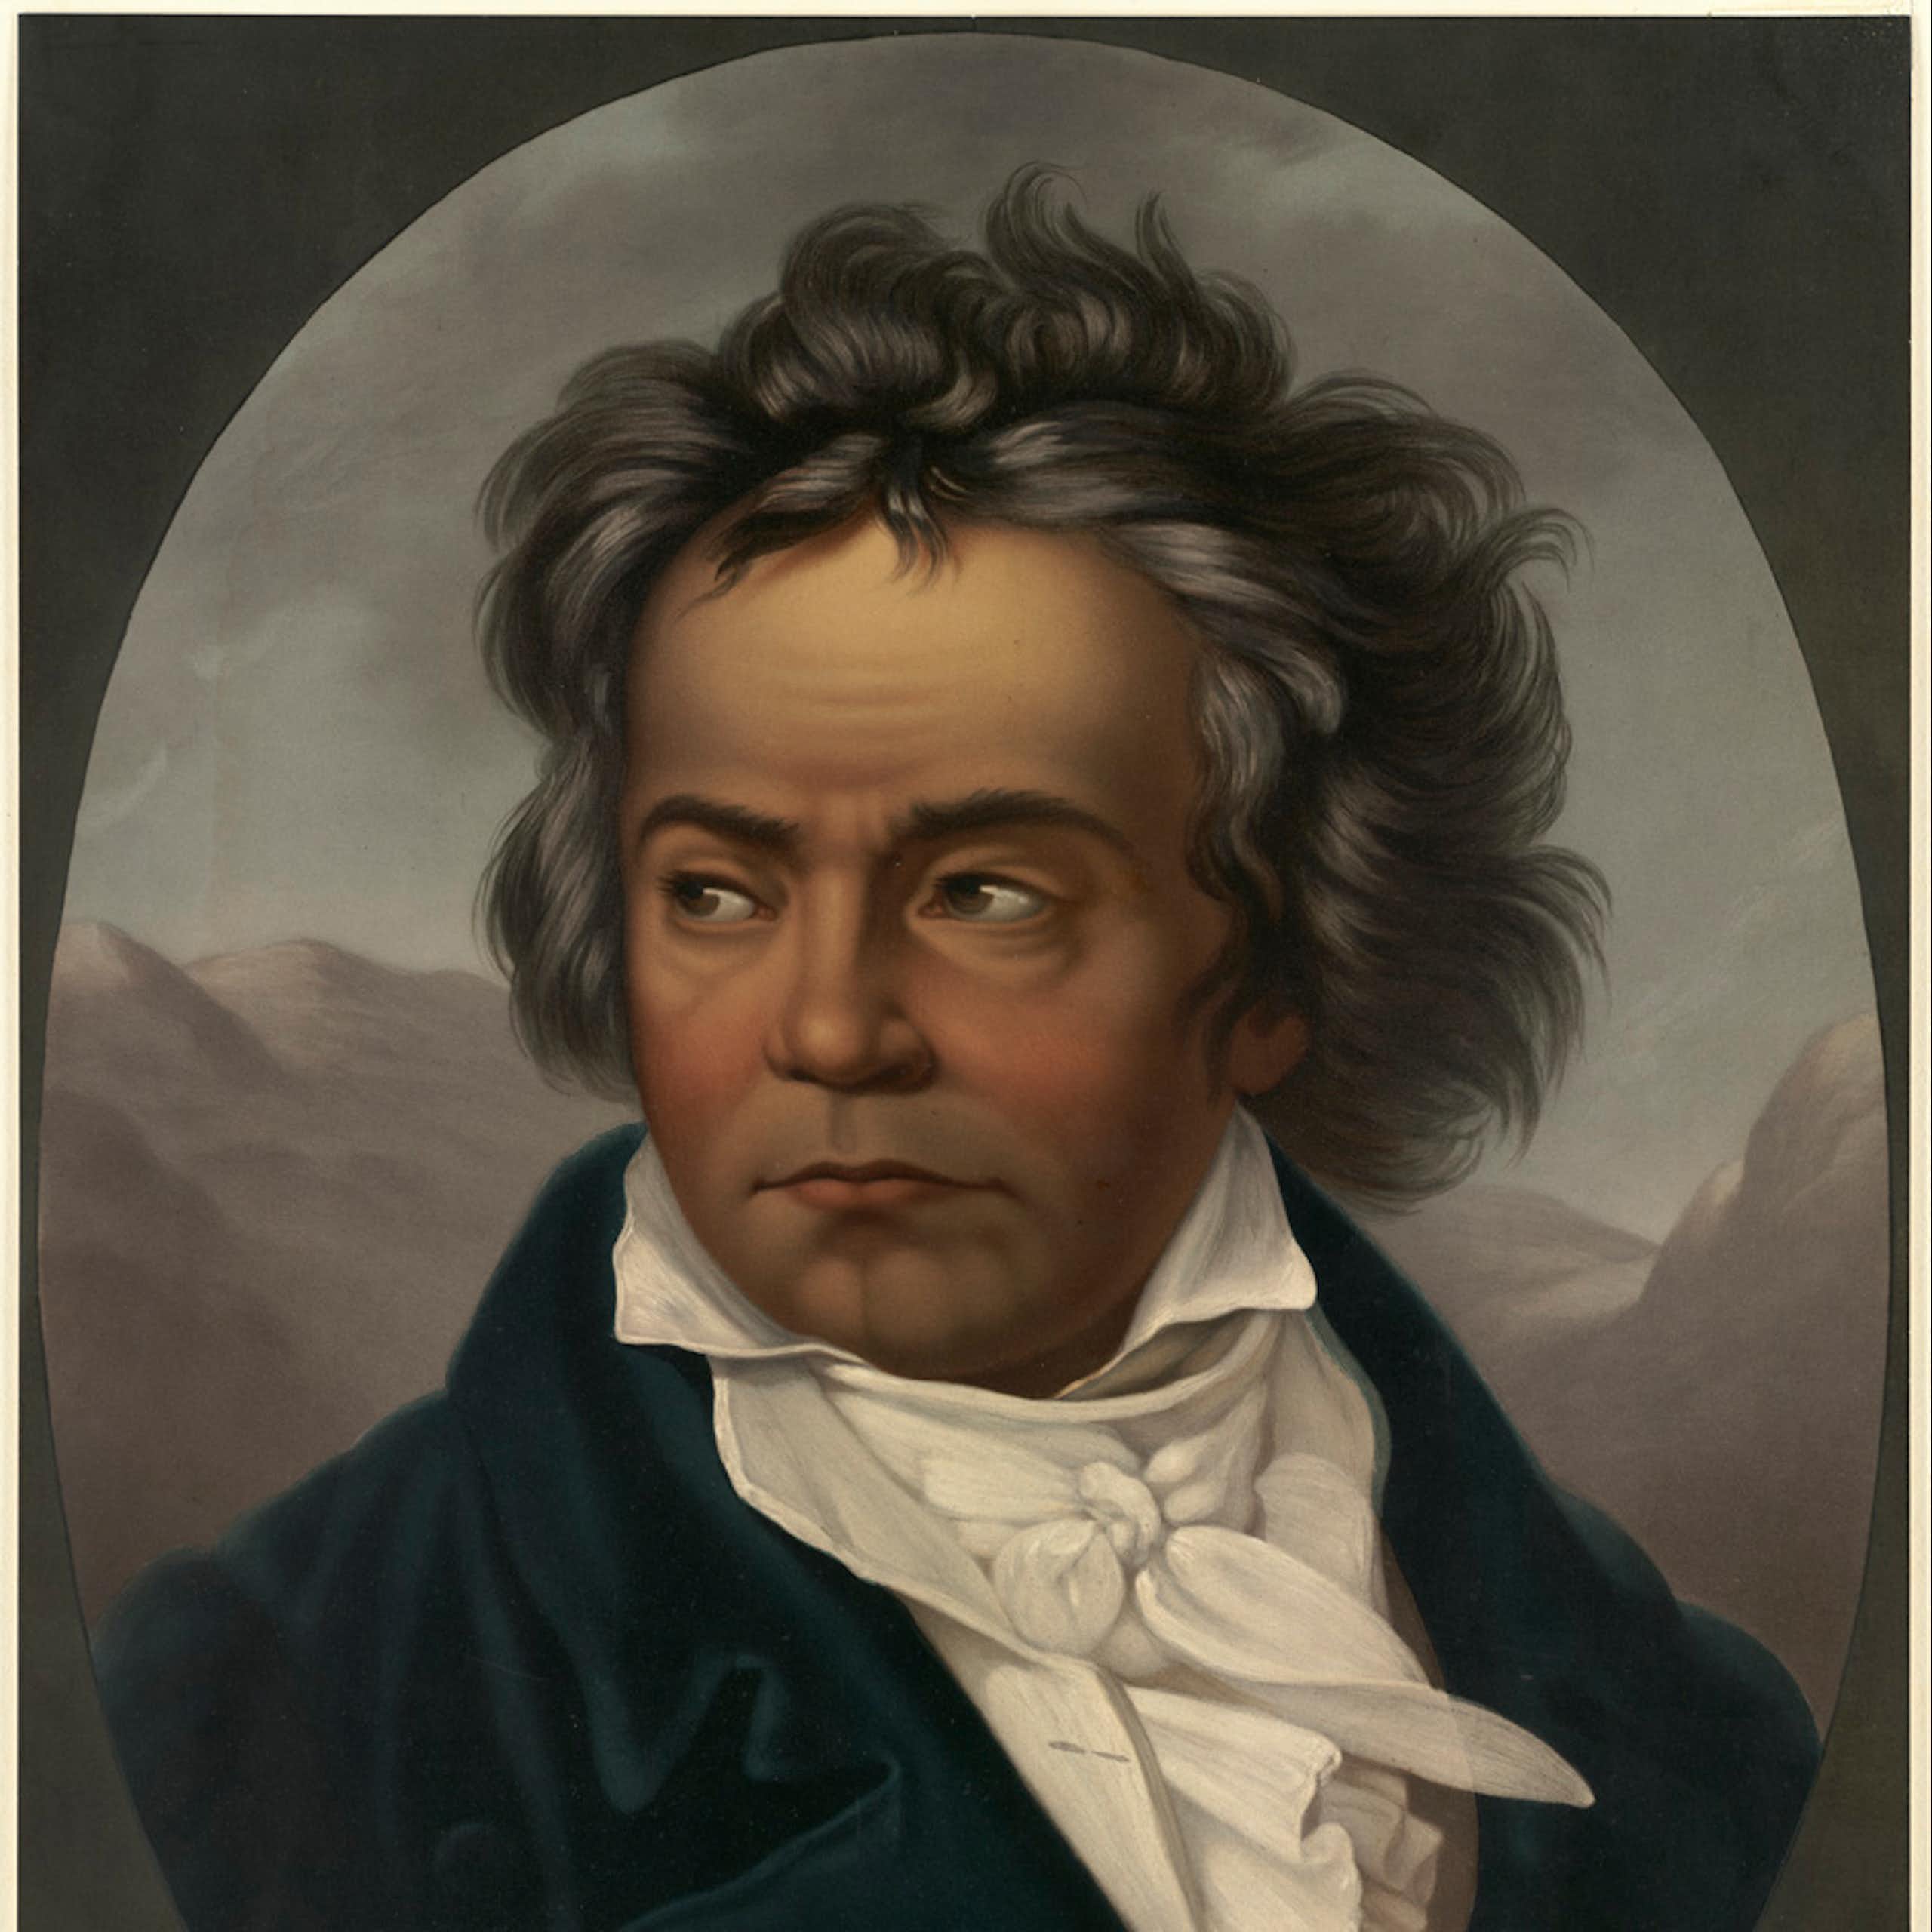 a painting of a man in 19th centruy clothing with unruly hair